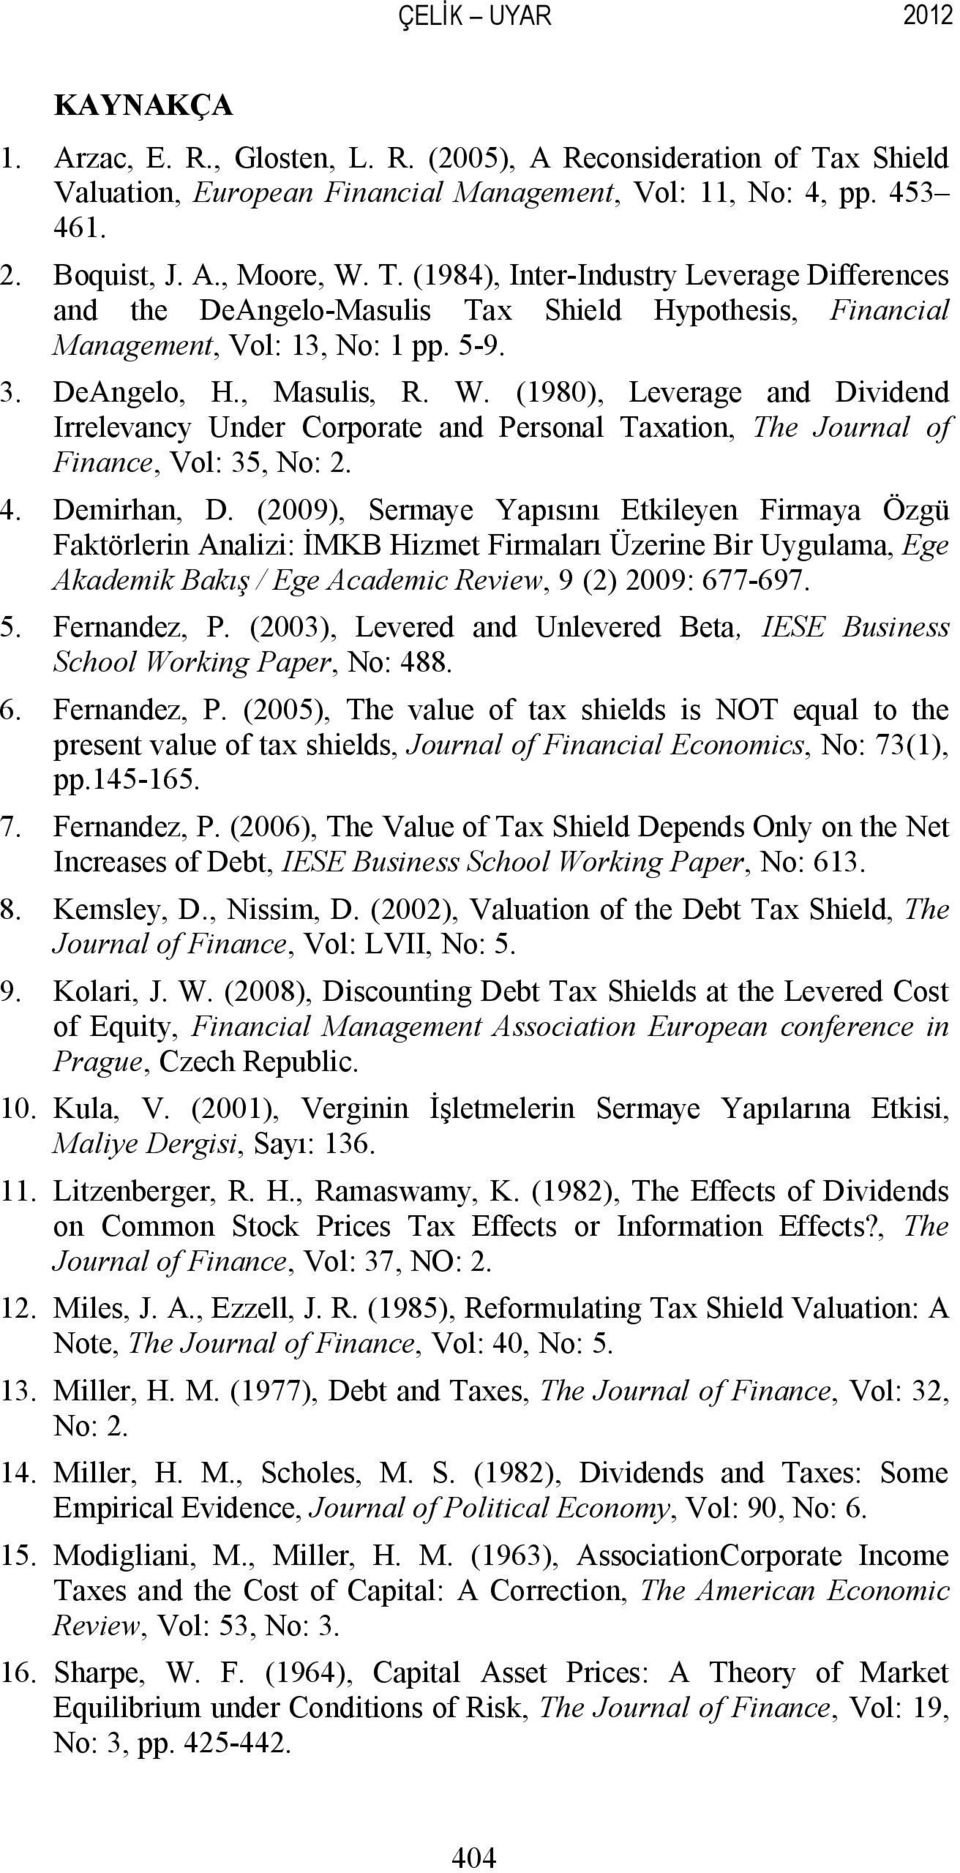 (1984), Inter-Industry Leverage Differences and the DeAngelo-Masulis Tax Shield Hypothesis, Financial Management, Vol: 13, No: 1 pp. 5-9. 3. DeAngelo, H., Masulis, R. W.